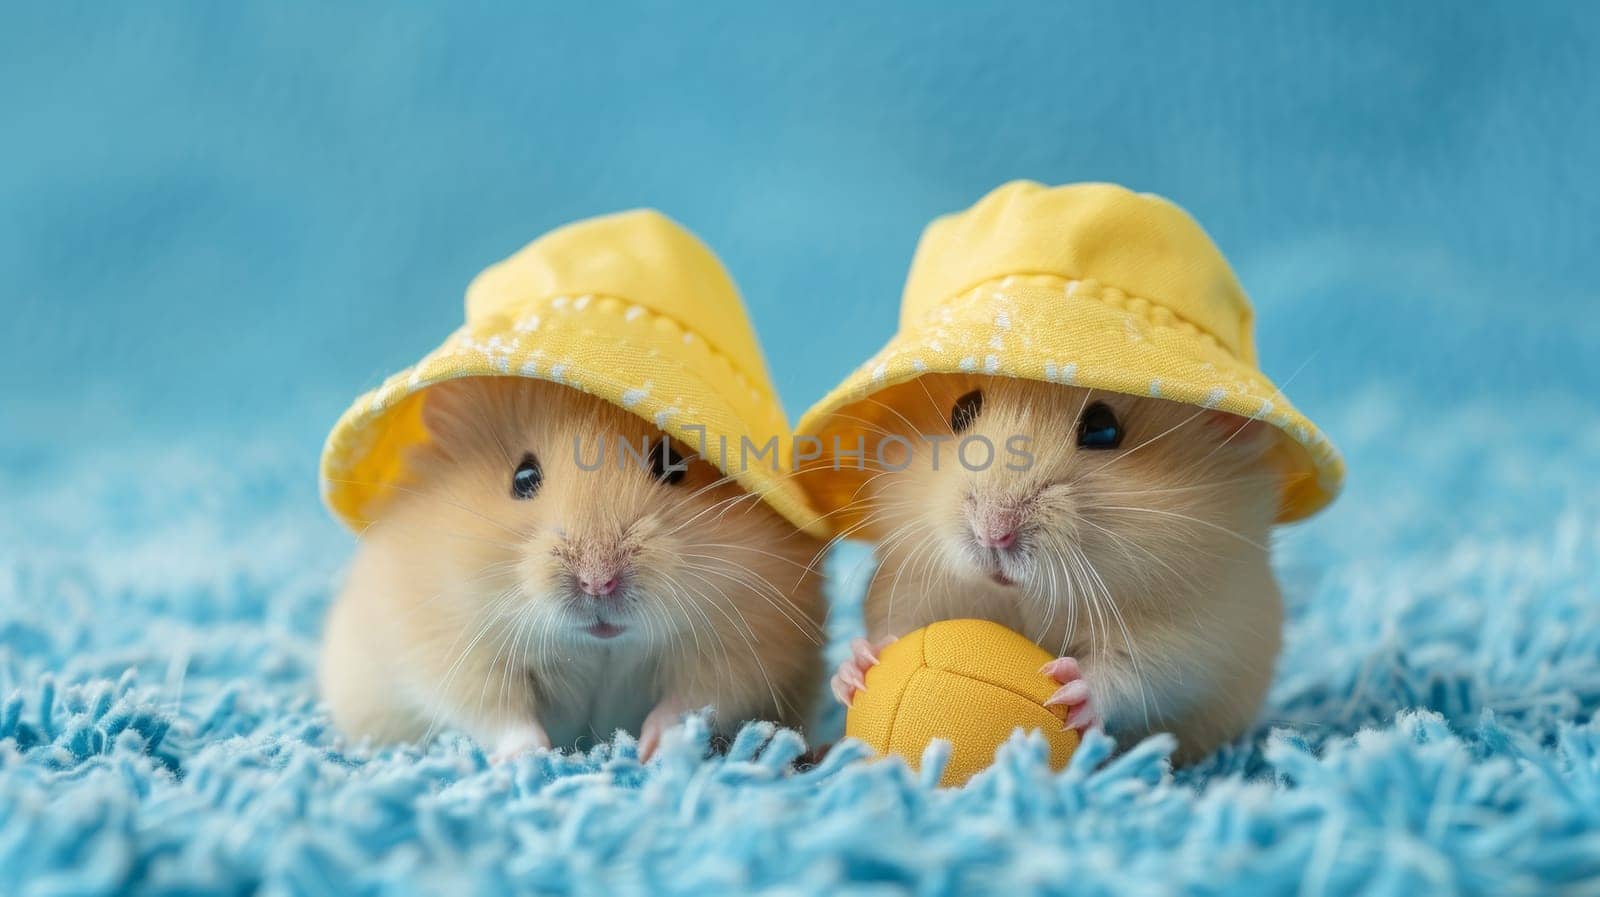 Two small hamsters wearing yellow hats and holding a ball